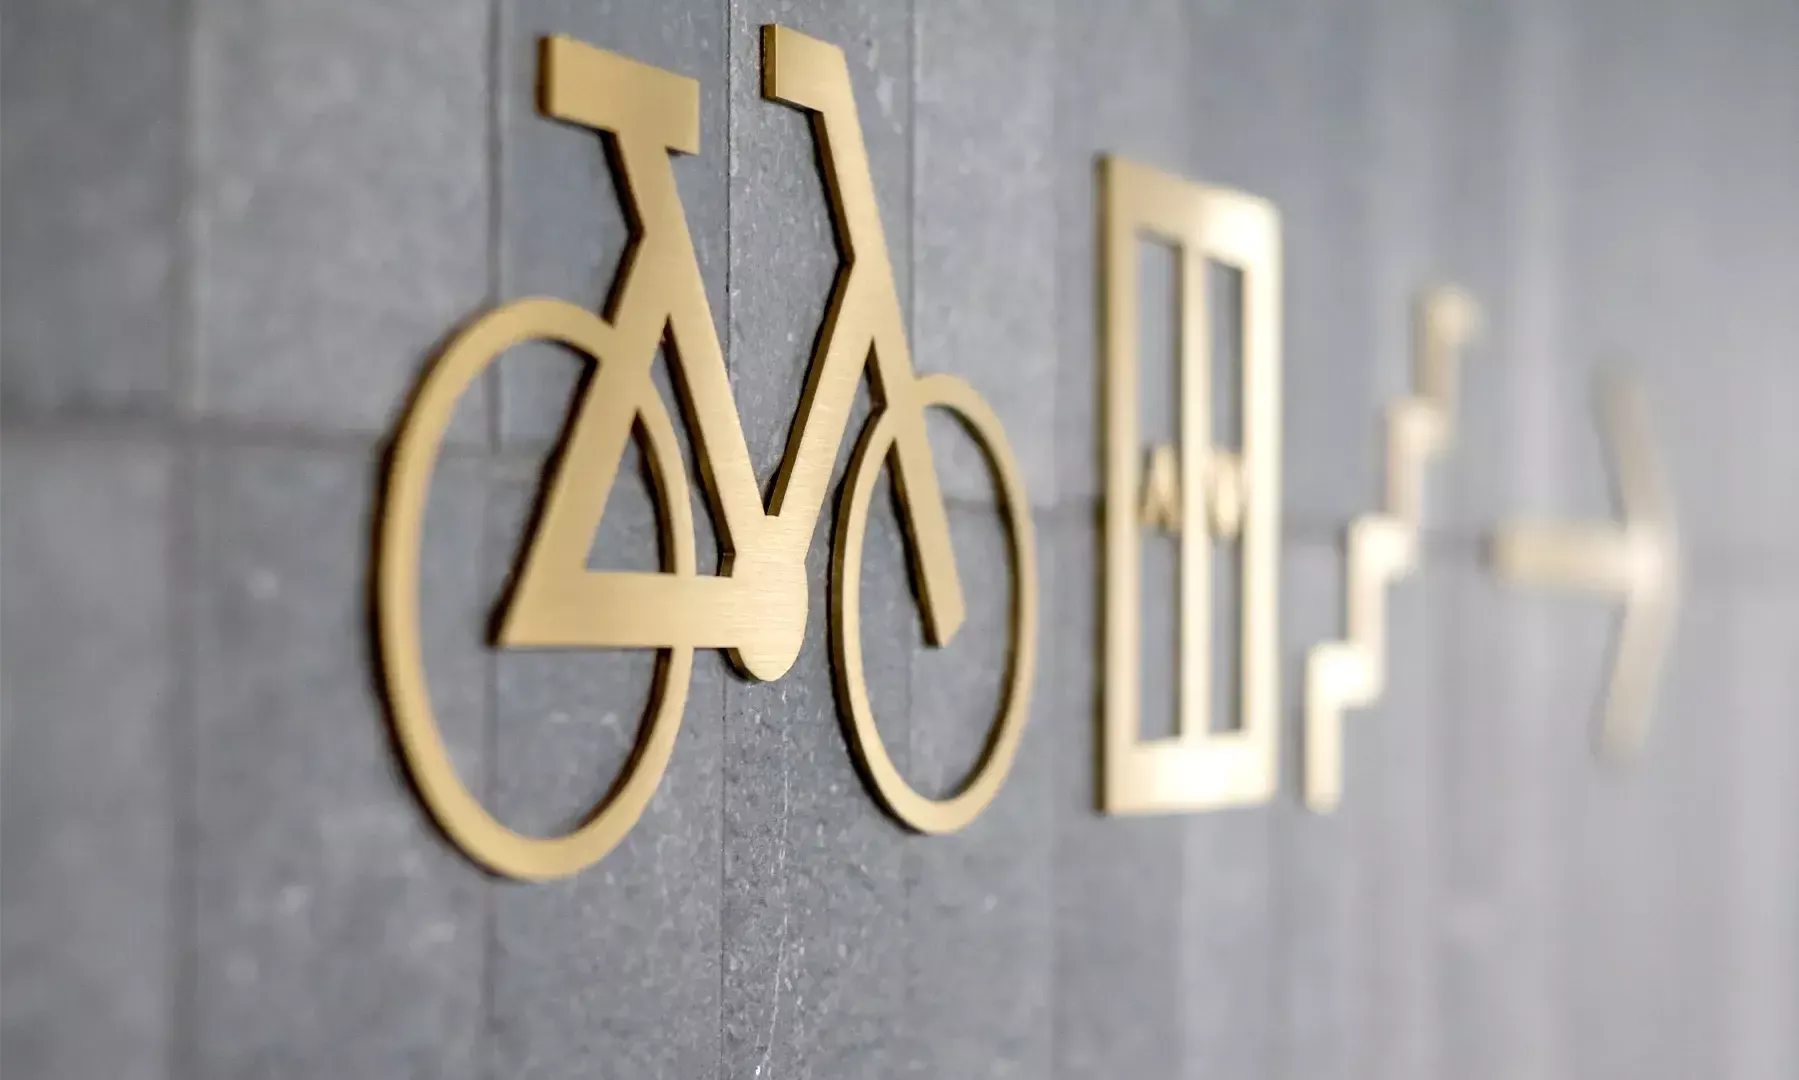 Pictogram bicycle sign - Pictogram metal bicycle sign